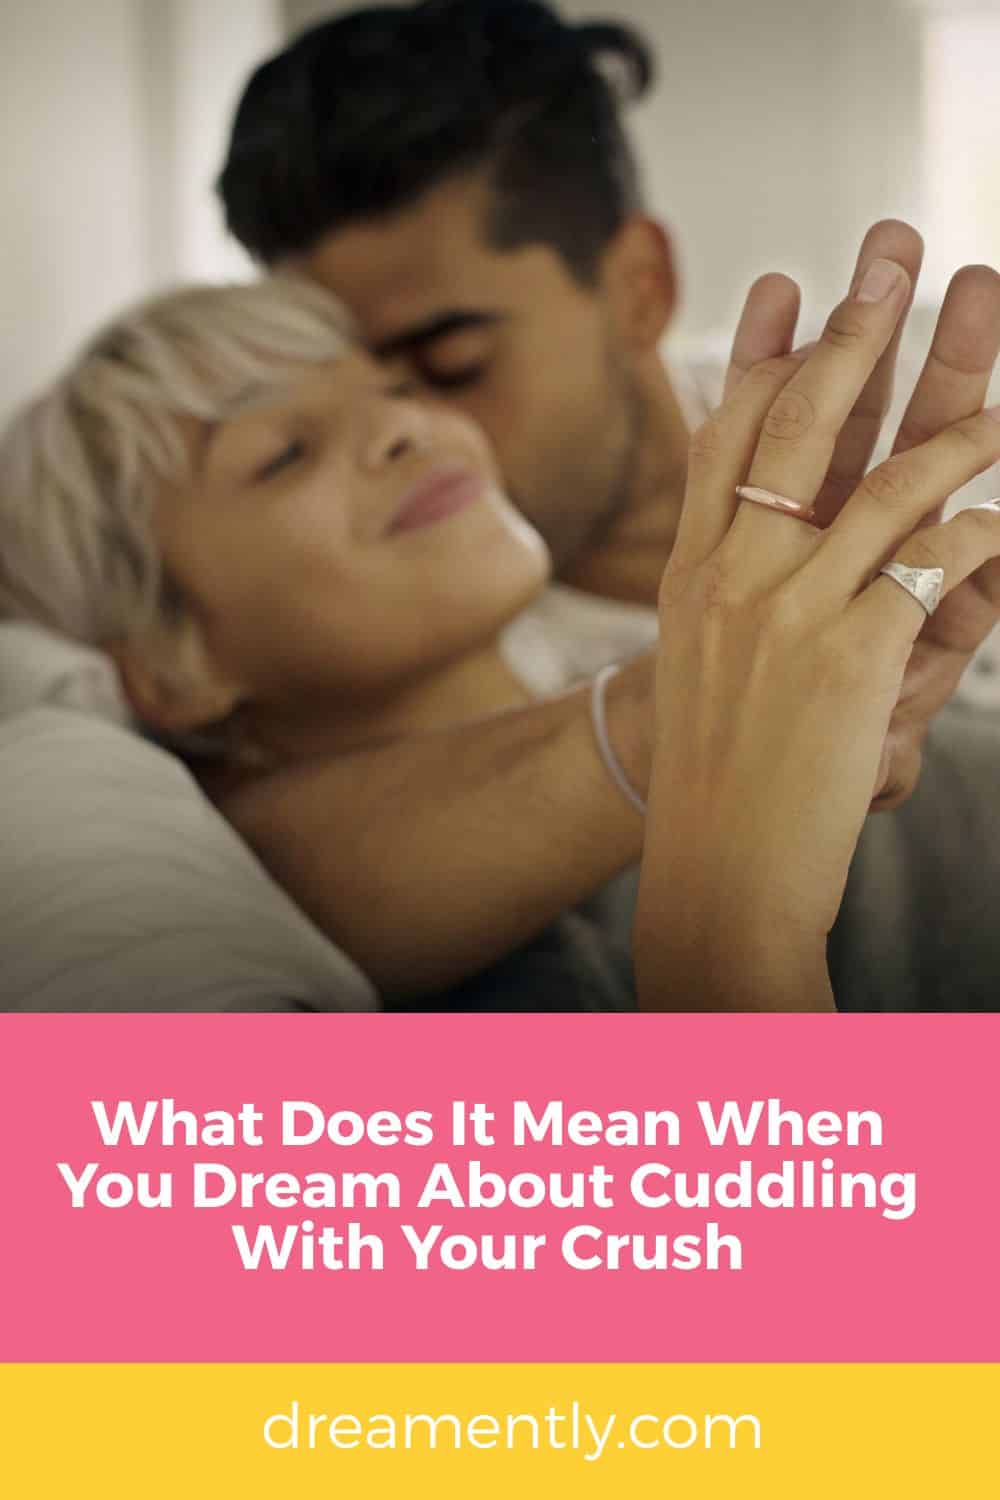 What Does It Mean When You Dream About Cuddling With Your Crush